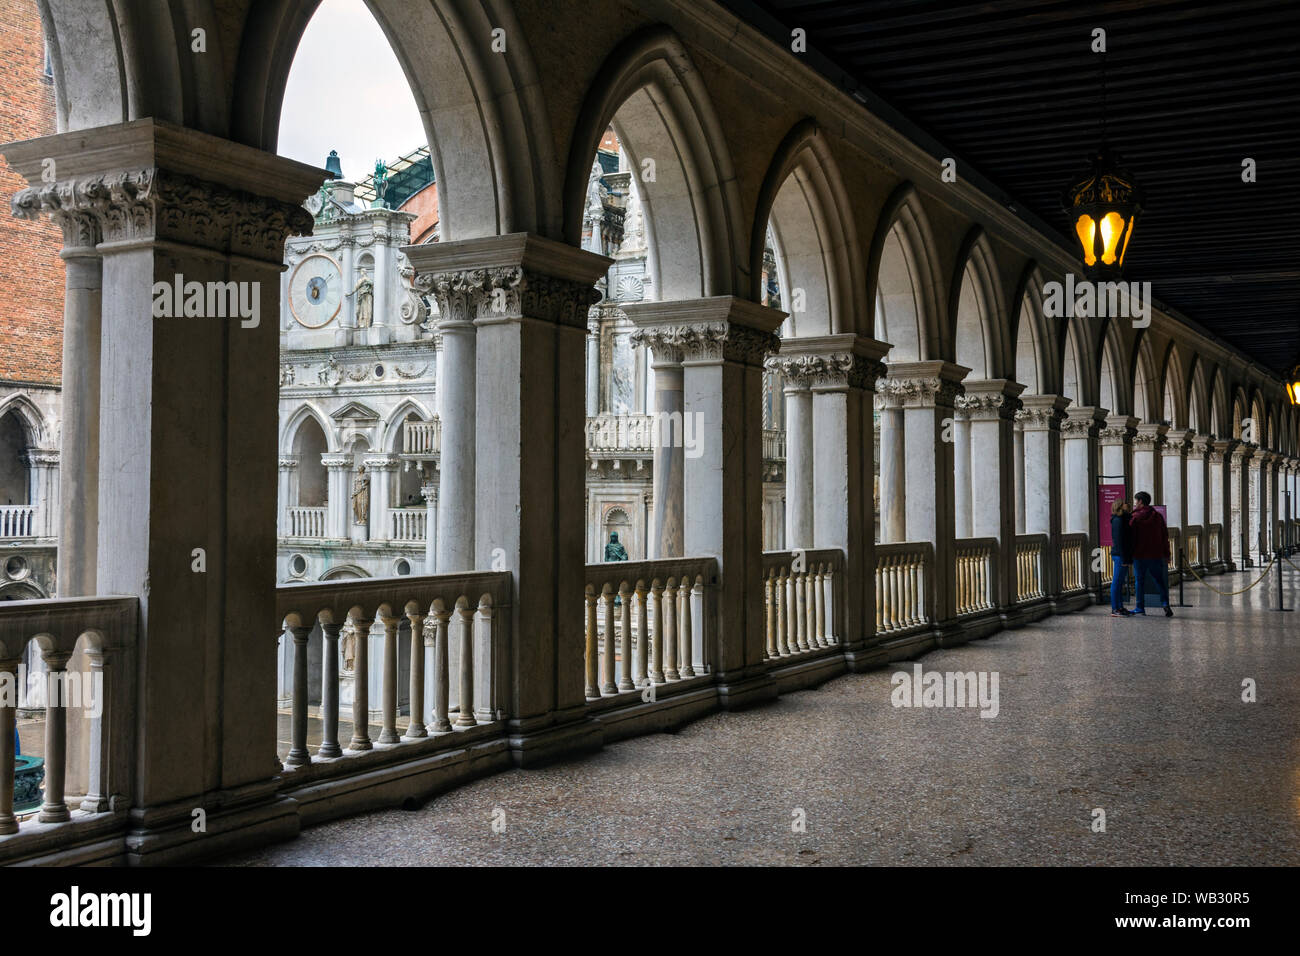 The upper arcade overlooking the courtyard of the Doge's Palace (Palazzo Ducale), Venice, Italy Stock Photo